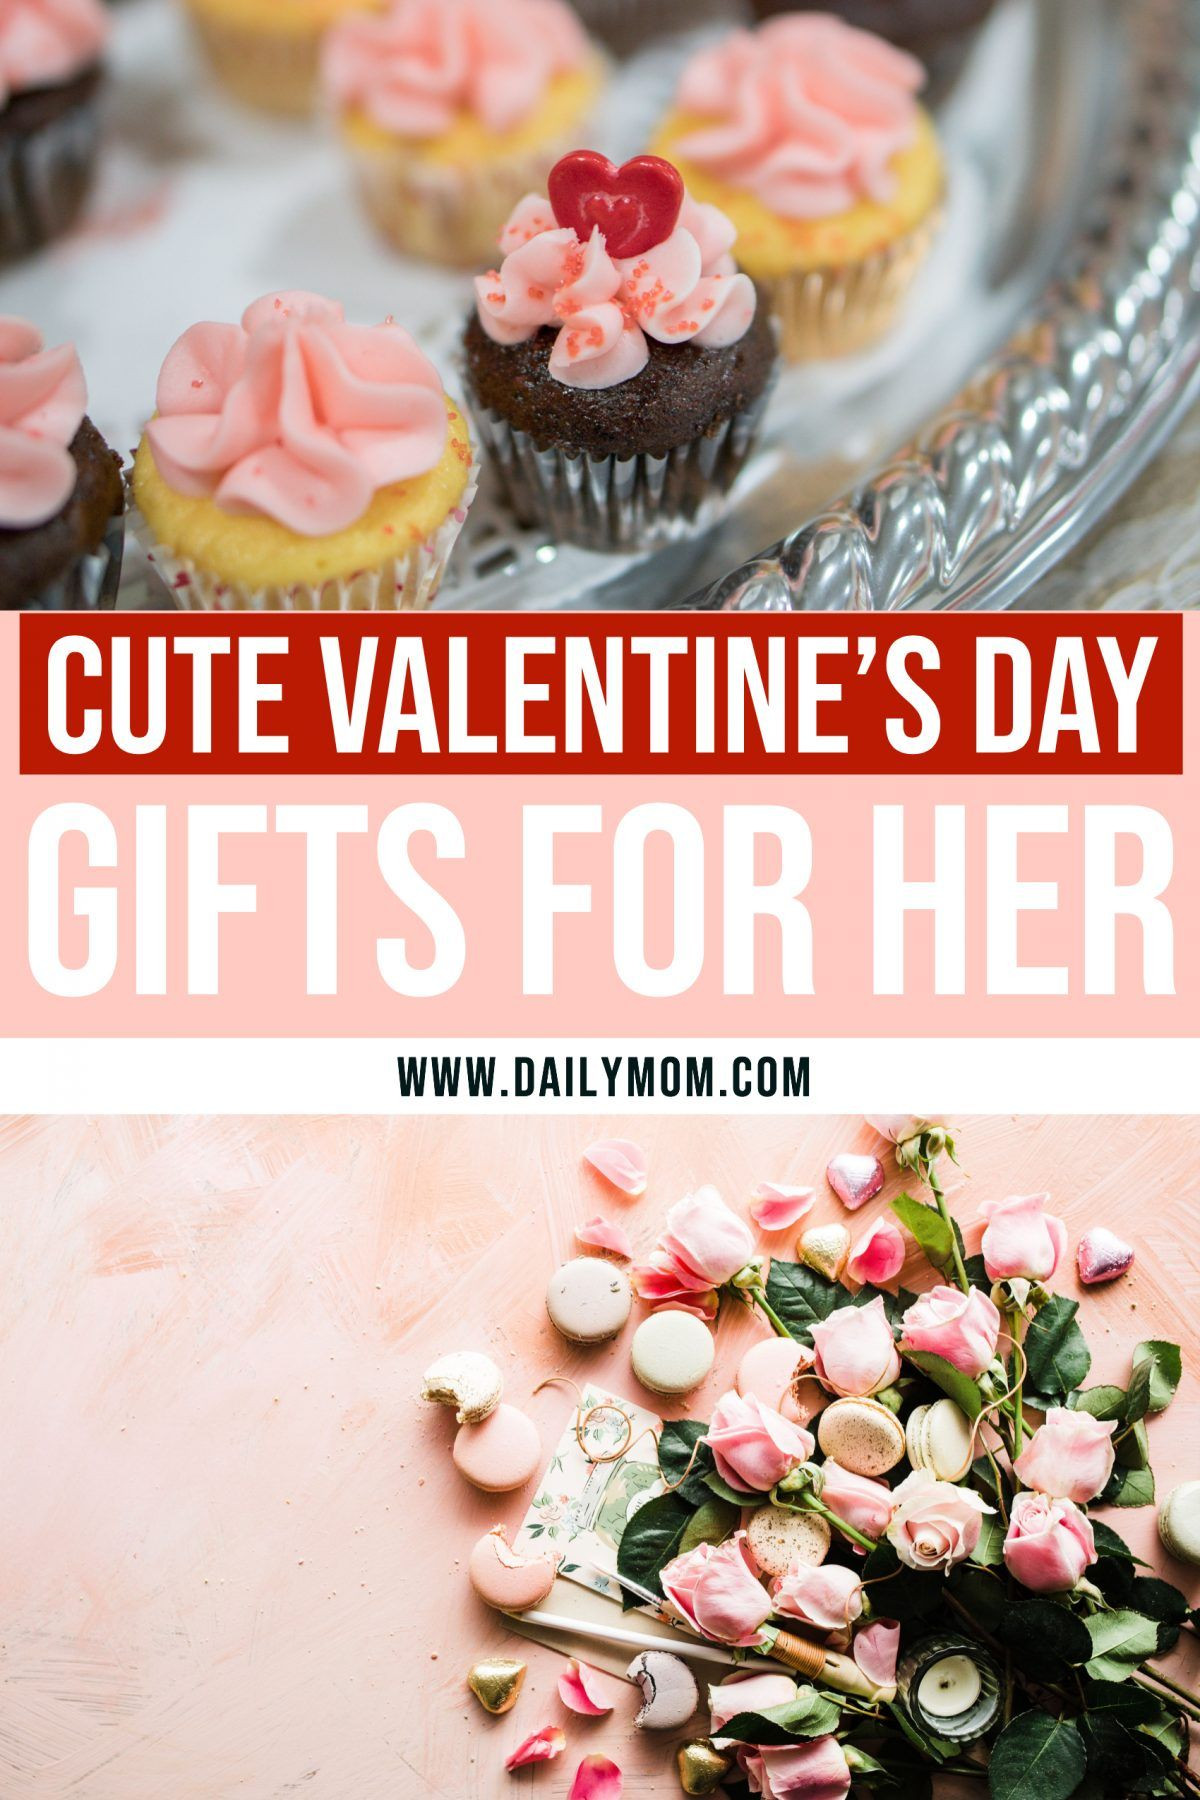 Cute Valentines Day Gifts For Her
 Cute Valentine s Day Gifts Under $50 For Her Read Now